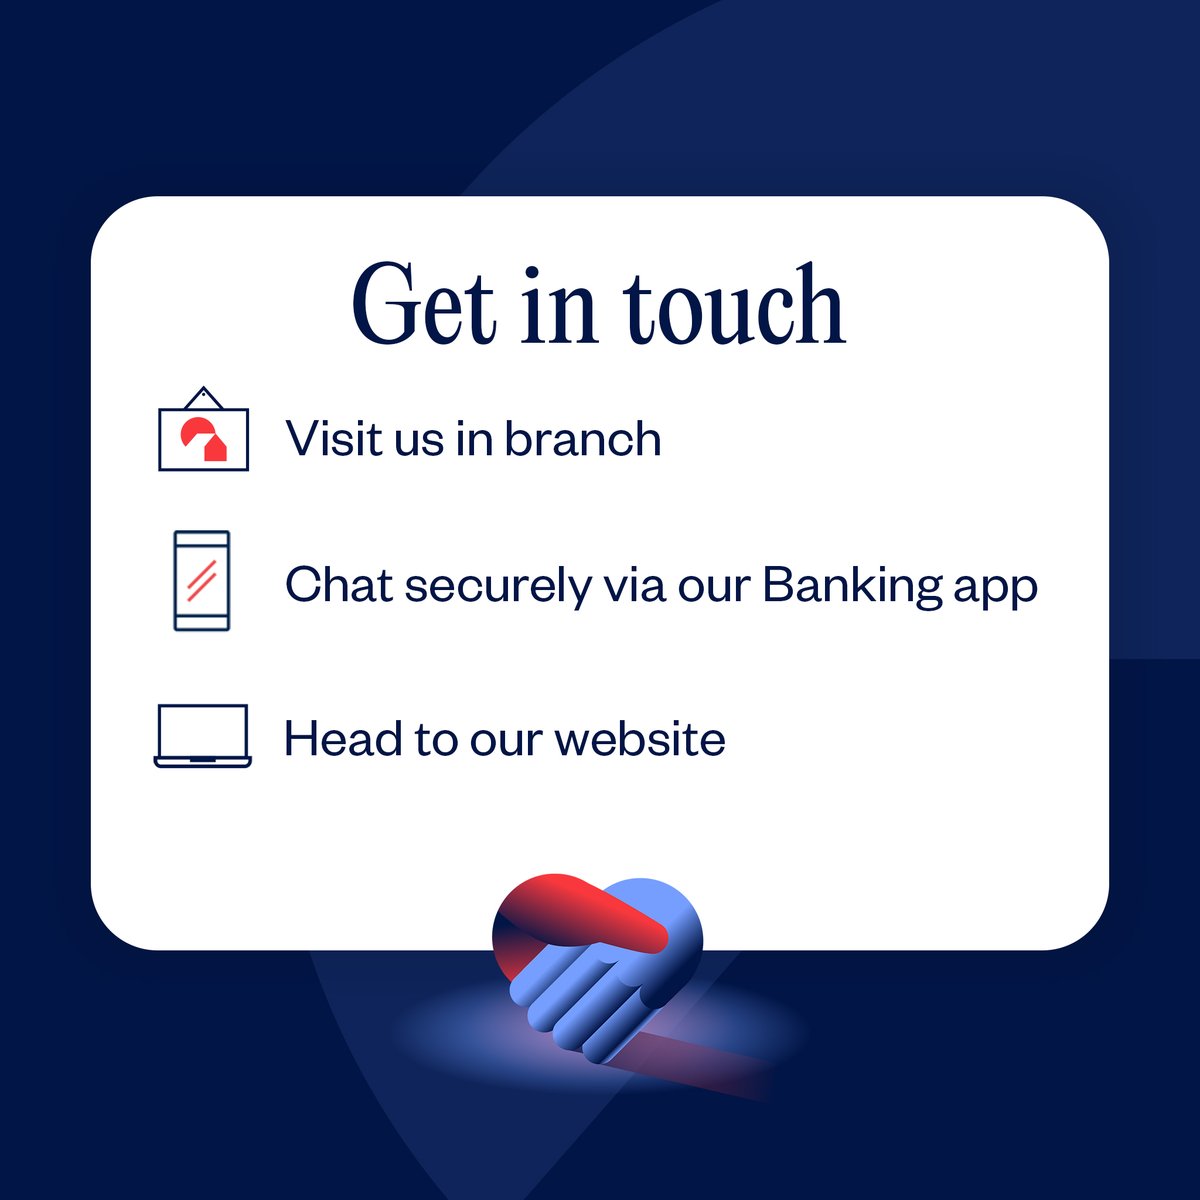 Whether you want to speak to a real person in branch, or do your banking online, there are many ways you can bank with us. If you need support, get in touch: spr.ly/6014RgPkA